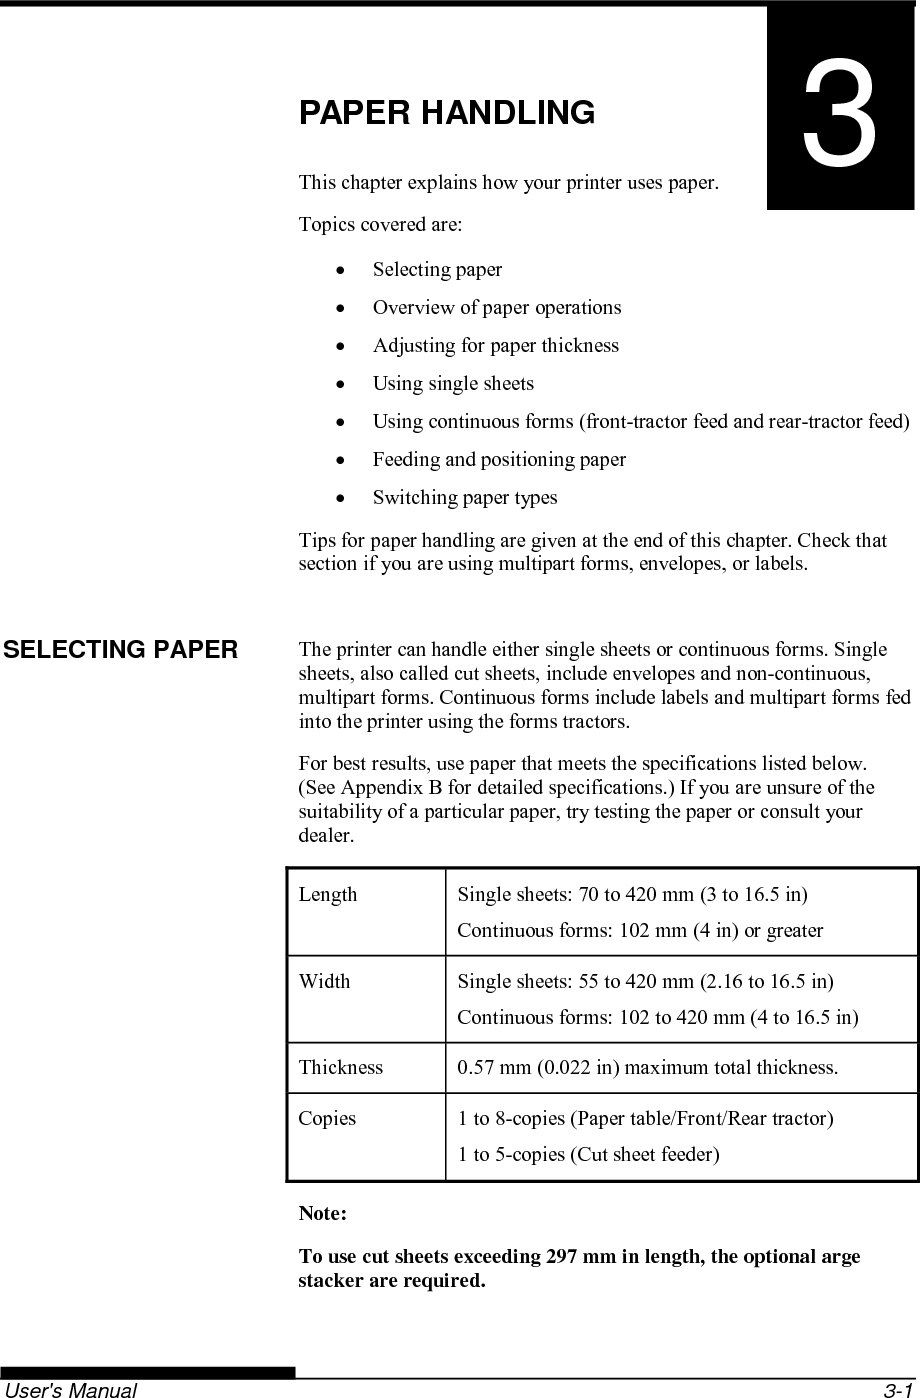   User&apos;s Manual  3-1 3 CHAPTER 3  PAPER HANDLING PAPER HANDLING This chapter explains how your printer uses paper. Topics covered are:  Selecting paper   Overview of paper operations   Adjusting for paper thickness   Using single sheets   Using continuous forms (front-tractor feed and rear-tractor feed)   Feeding and positioning paper   Switching paper types Tips for paper handling are given at the end of this chapter. Check that section if you are using multipart forms, envelopes, or labels.  The printer can handle either single sheets or continuous forms. Single sheets, also called cut sheets, include envelopes and non-continuous, multipart forms. Continuous forms include labels and multipart forms fed into the printer using the forms tractors. For best results, use paper that meets the specifications listed below.  (See Appendix B for detailed specifications.) If you are unsure of the suitability of a particular paper, try testing the paper or consult your dealer. Length  Single sheets: 70 to 420 mm (3 to 16.5 in) Continuous forms: 102 mm (4 in) or greater Width  Single sheets: 55 to 420 mm (2.16 to 16.5 in) Continuous forms: 102 to 420 mm (4 to 16.5 in) Thickness  0.57 mm (0.022 in) maximum total thickness. Copies  1 to 8-copies (Paper table/Front/Rear tractor) 1 to 5-copies (Cut sheet feeder) Note: To use cut sheets exceeding 297 mm in length, the optional arge stacker are required.  SELECTING PAPER 